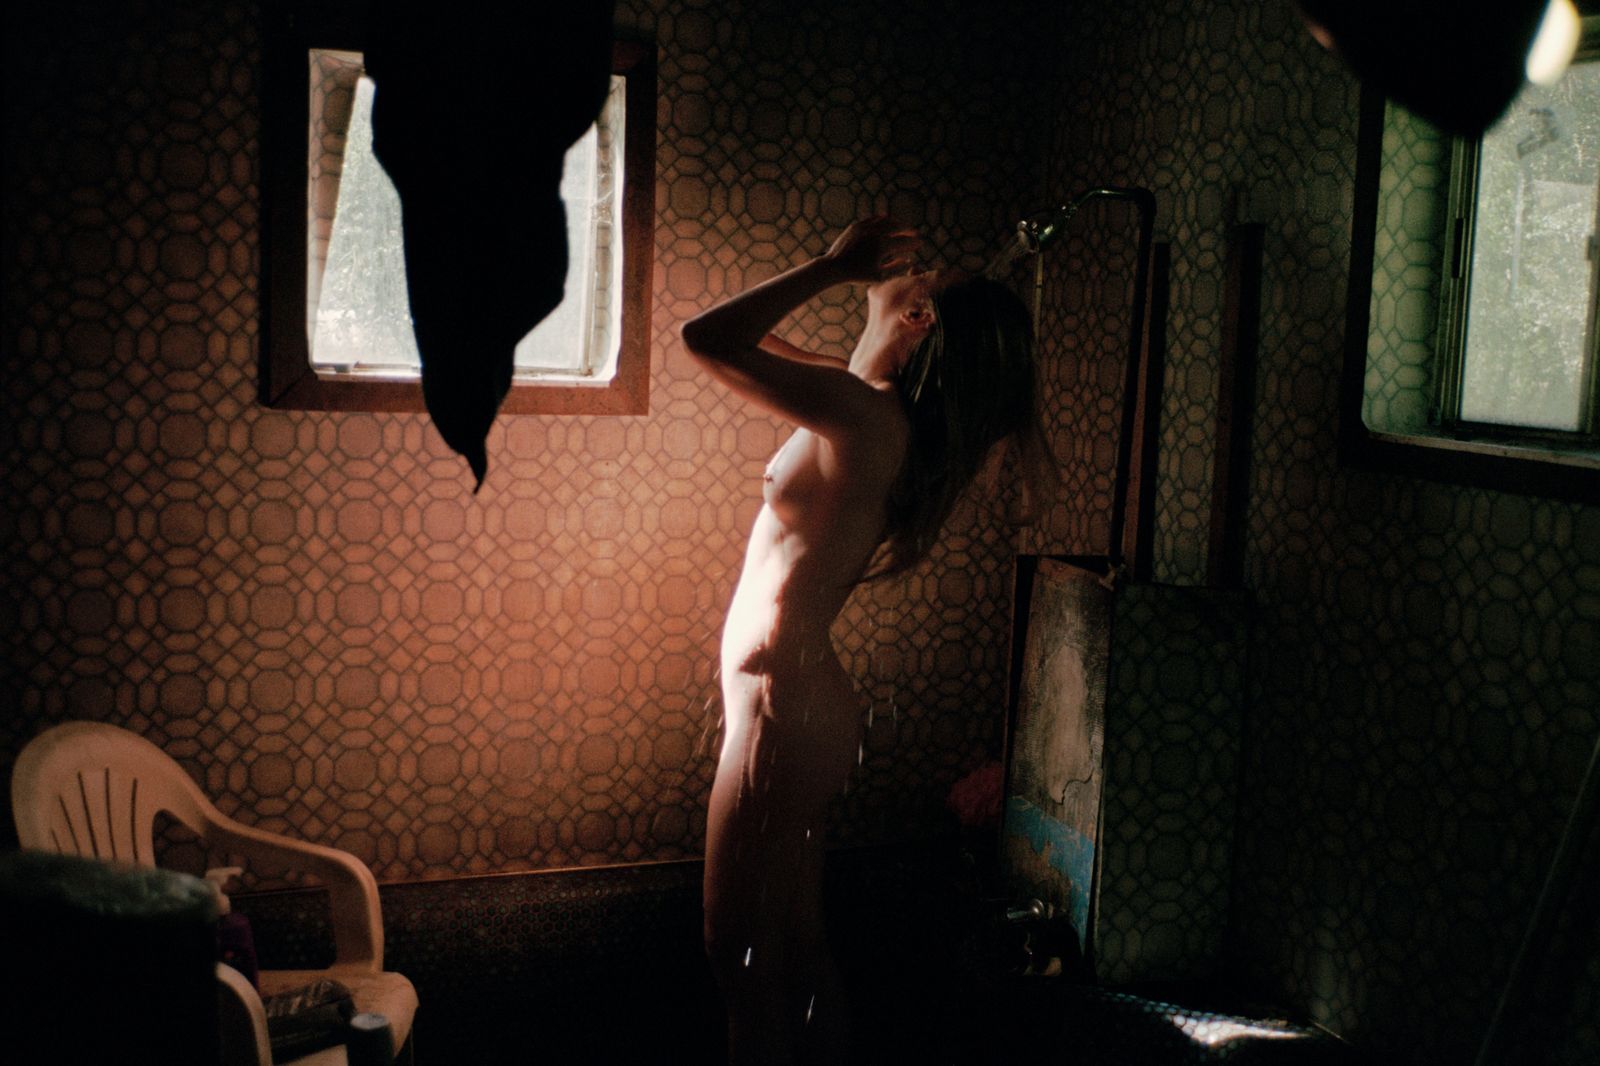 © Louise Amelie - "Louise" Taking a shower, Humboldt County.